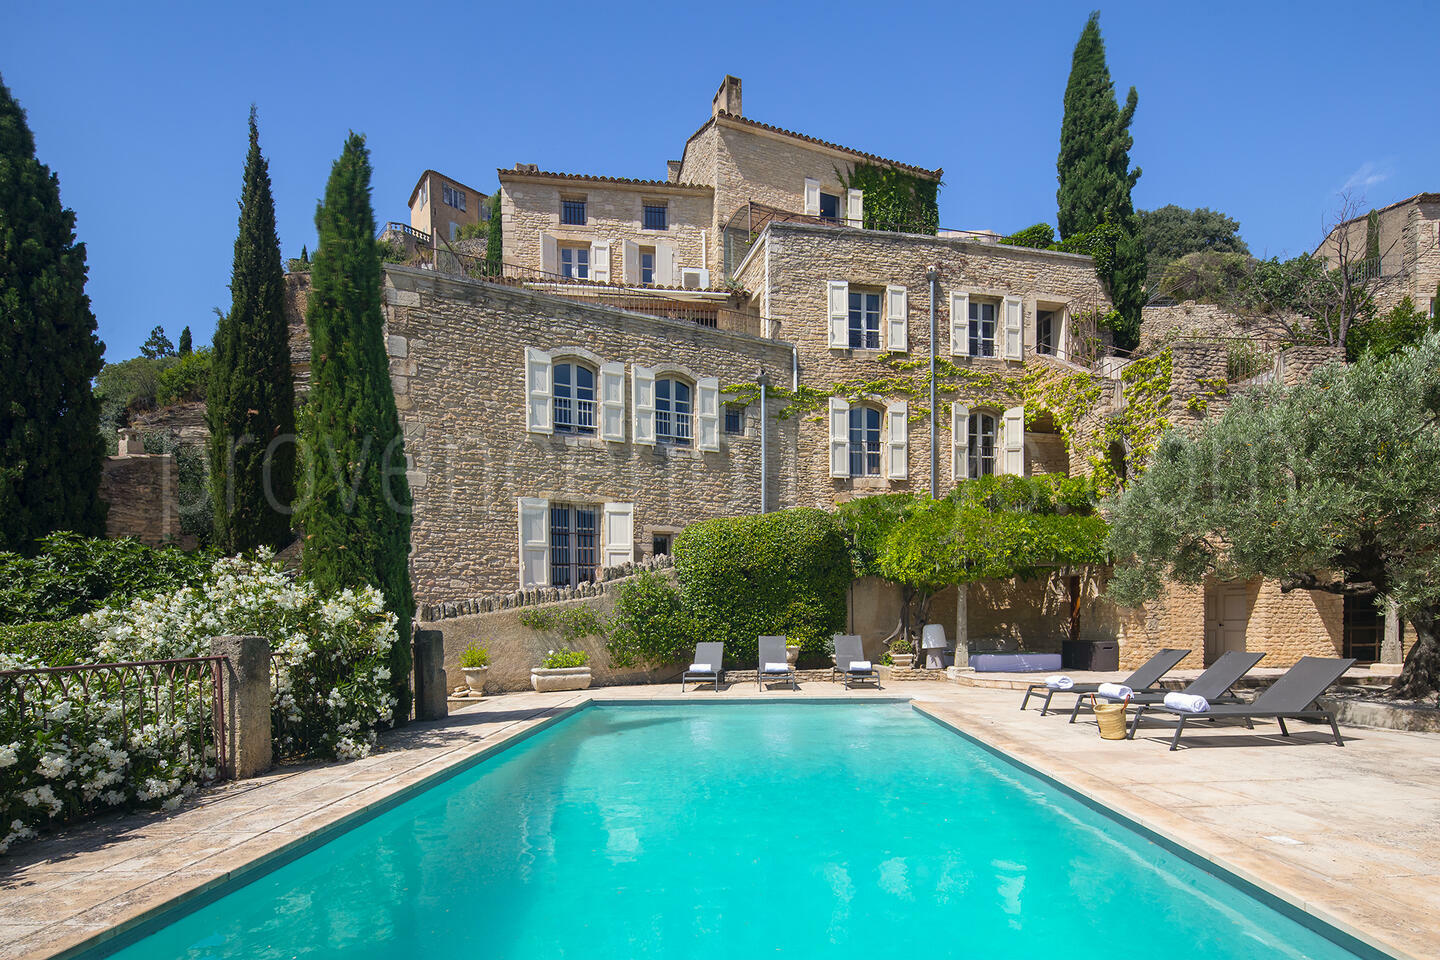 House for sale with heated swimming pool in the heart of Gordes 1 - Maison de la Placette: Villa: Exterior